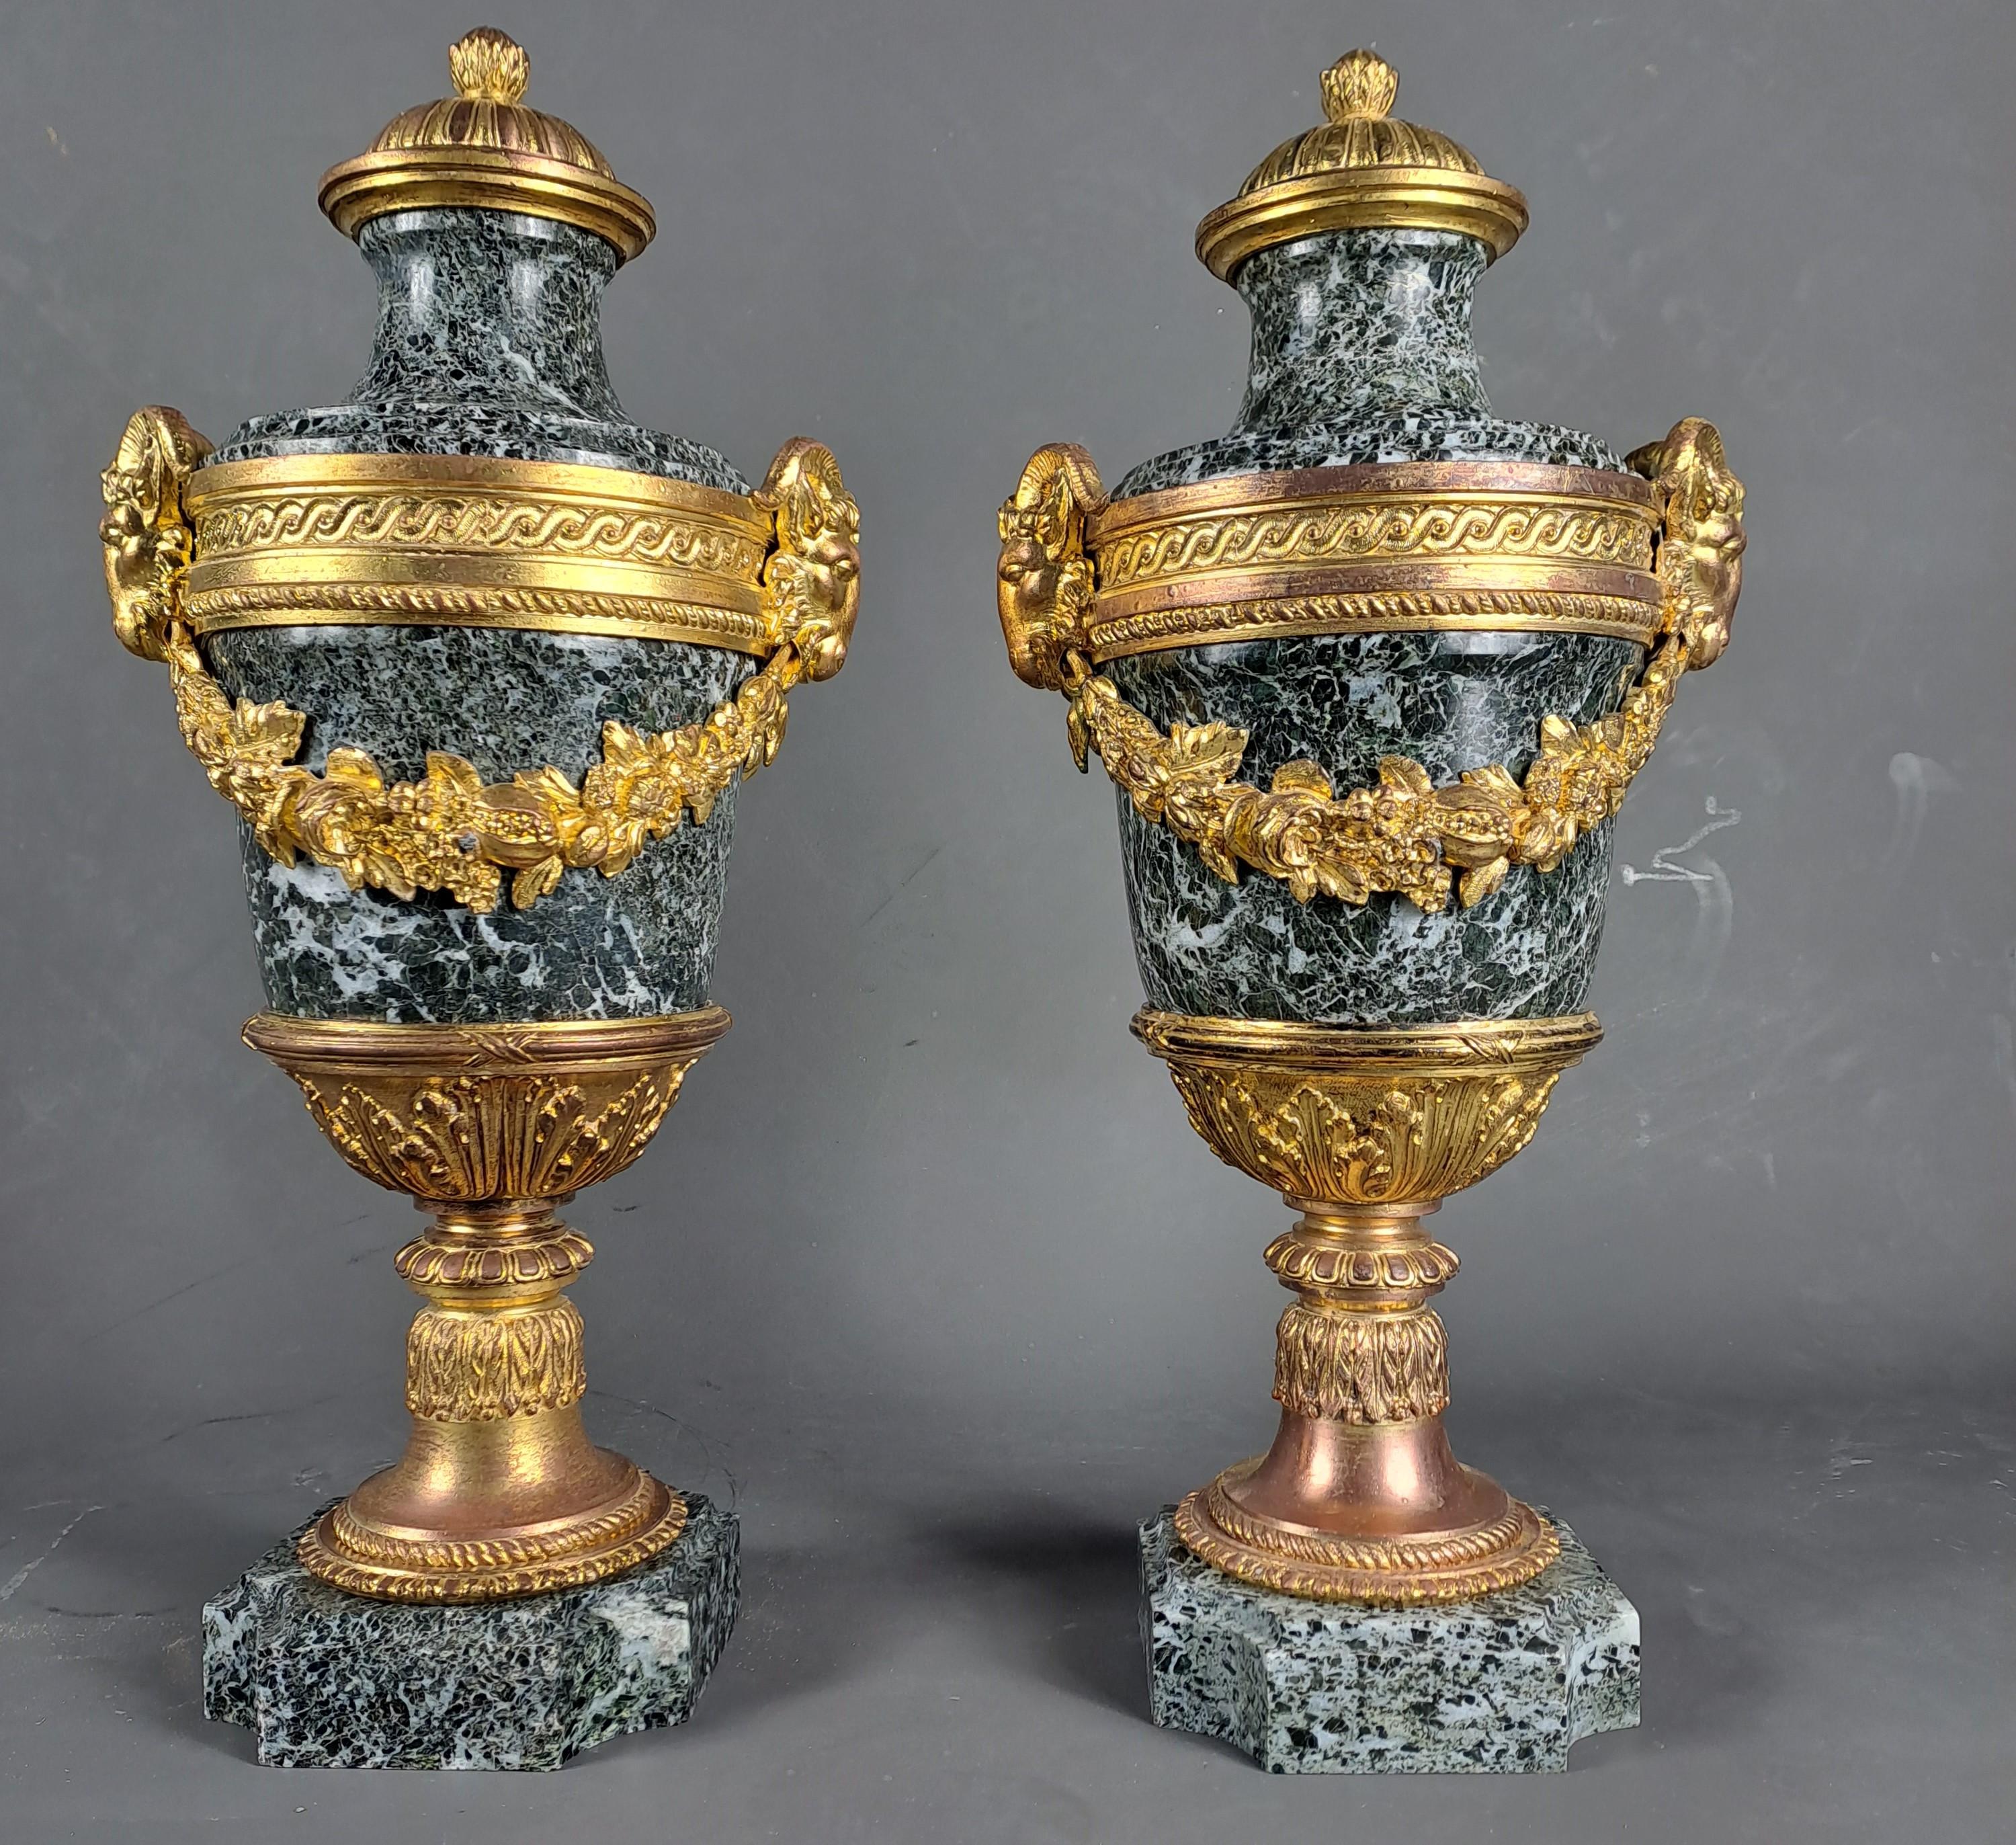 19th Century Pair Of Louis XVI Style Cassolettes In Sea Green Marble And Gilt Bronze